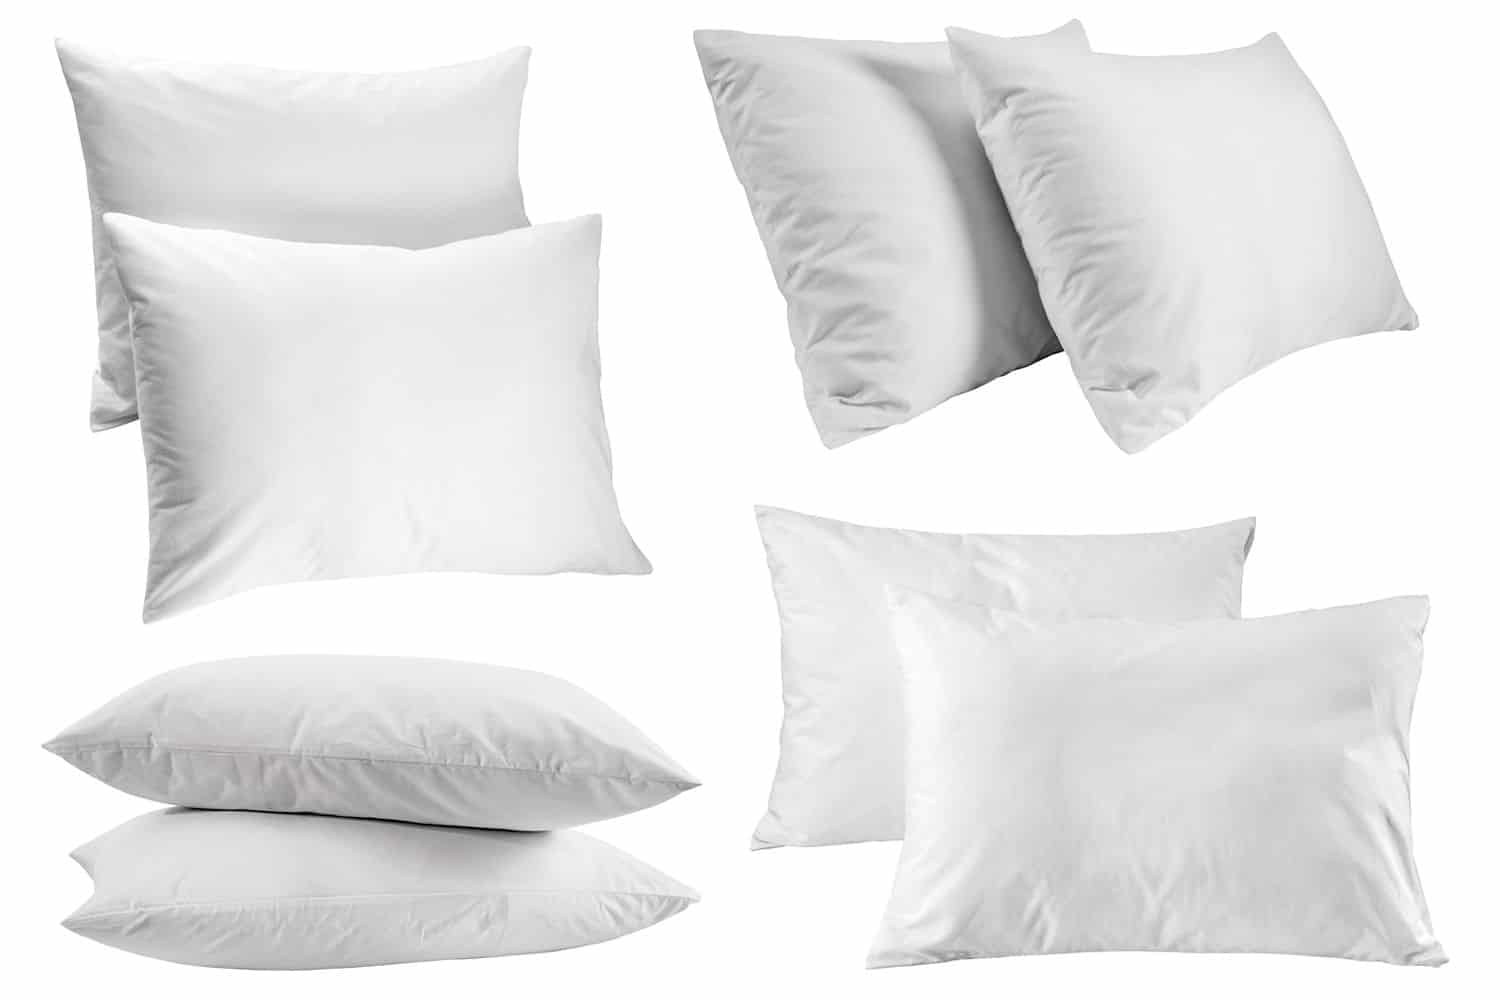 Sleep Restoration Pillow Inserts - White, Throw Pillow Insert for Couch, Bed, Living Room, Outdoor - Decorative Pillows